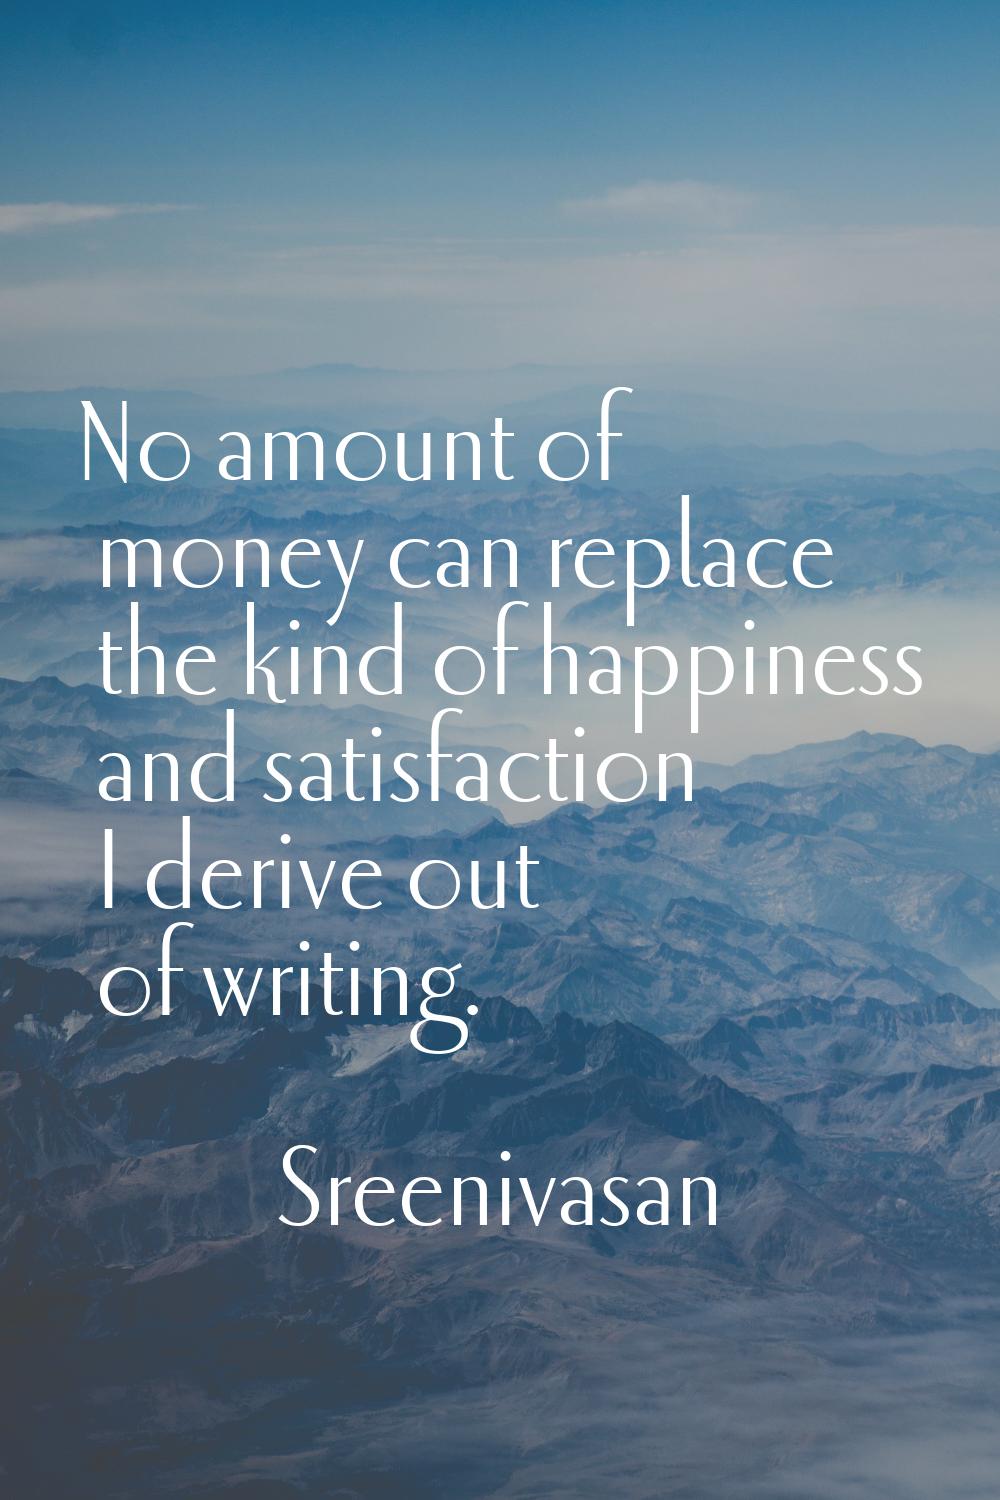 No amount of money can replace the kind of happiness and satisfaction I derive out of writing.